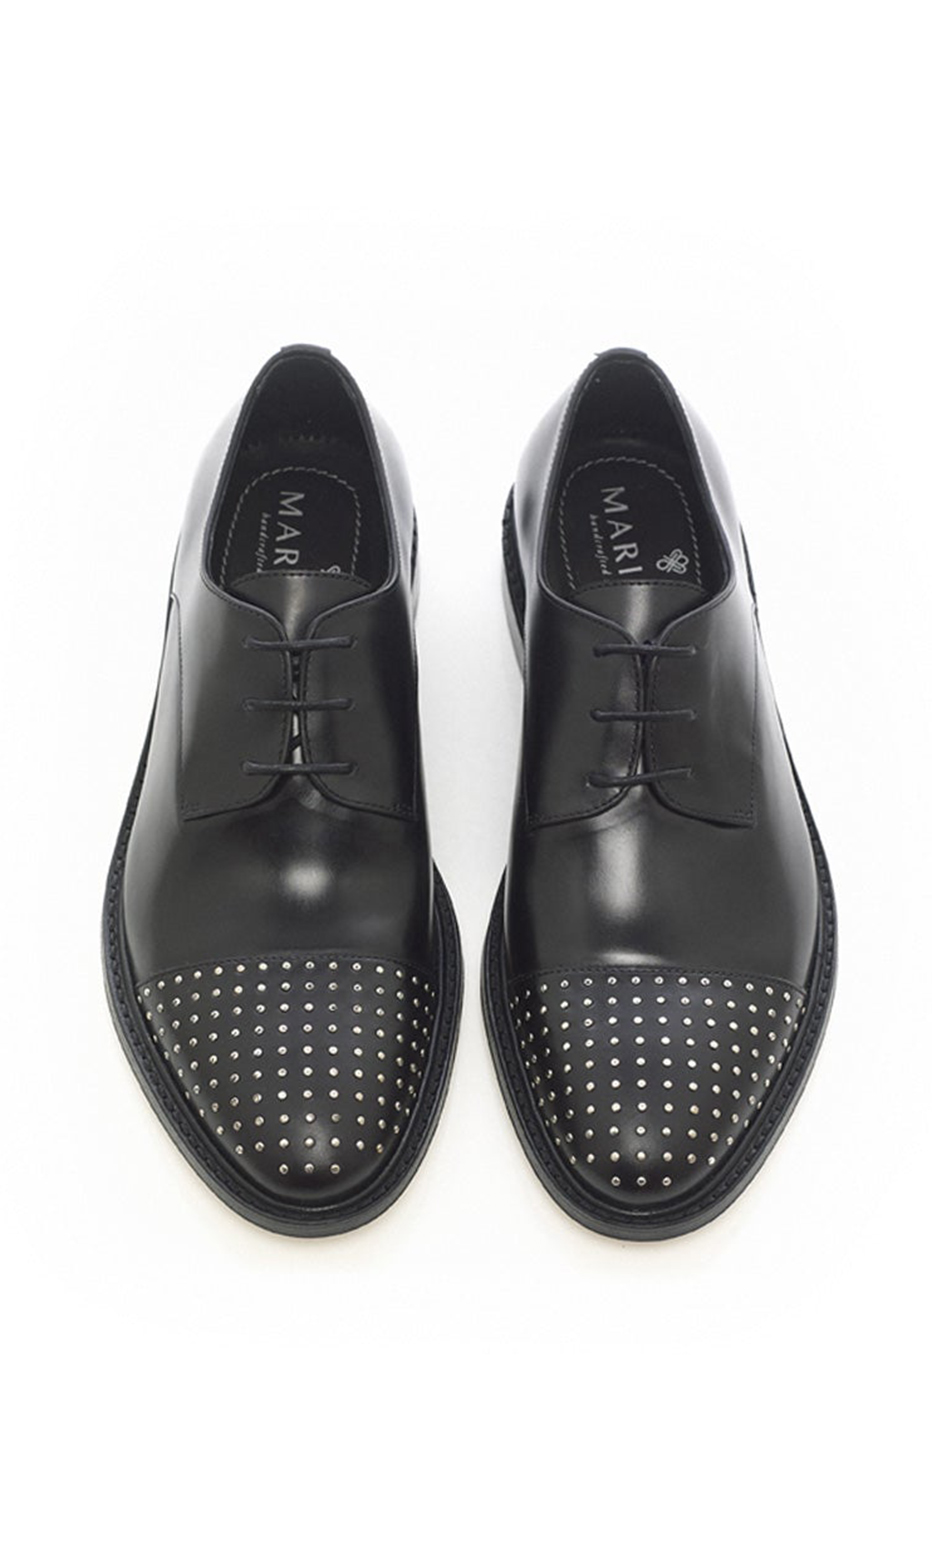 studded leather derbies mariano shoes